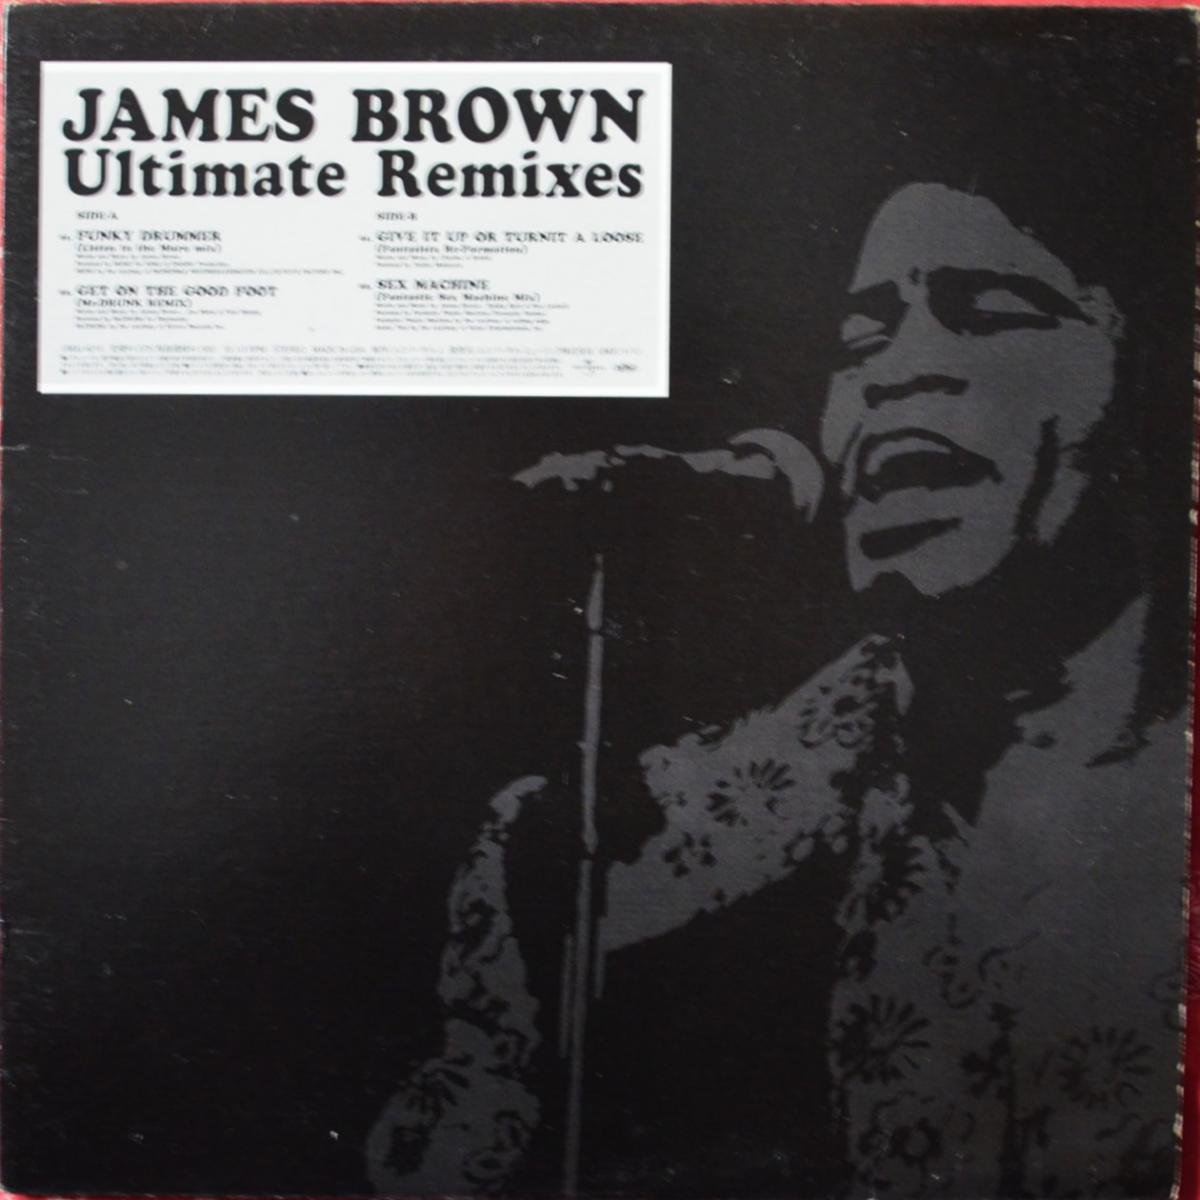 JAMES BROWN / FUNKY DRUMMER (LISTEN TO THE MURO MIX) (ULTIMATE REMIXES) (12